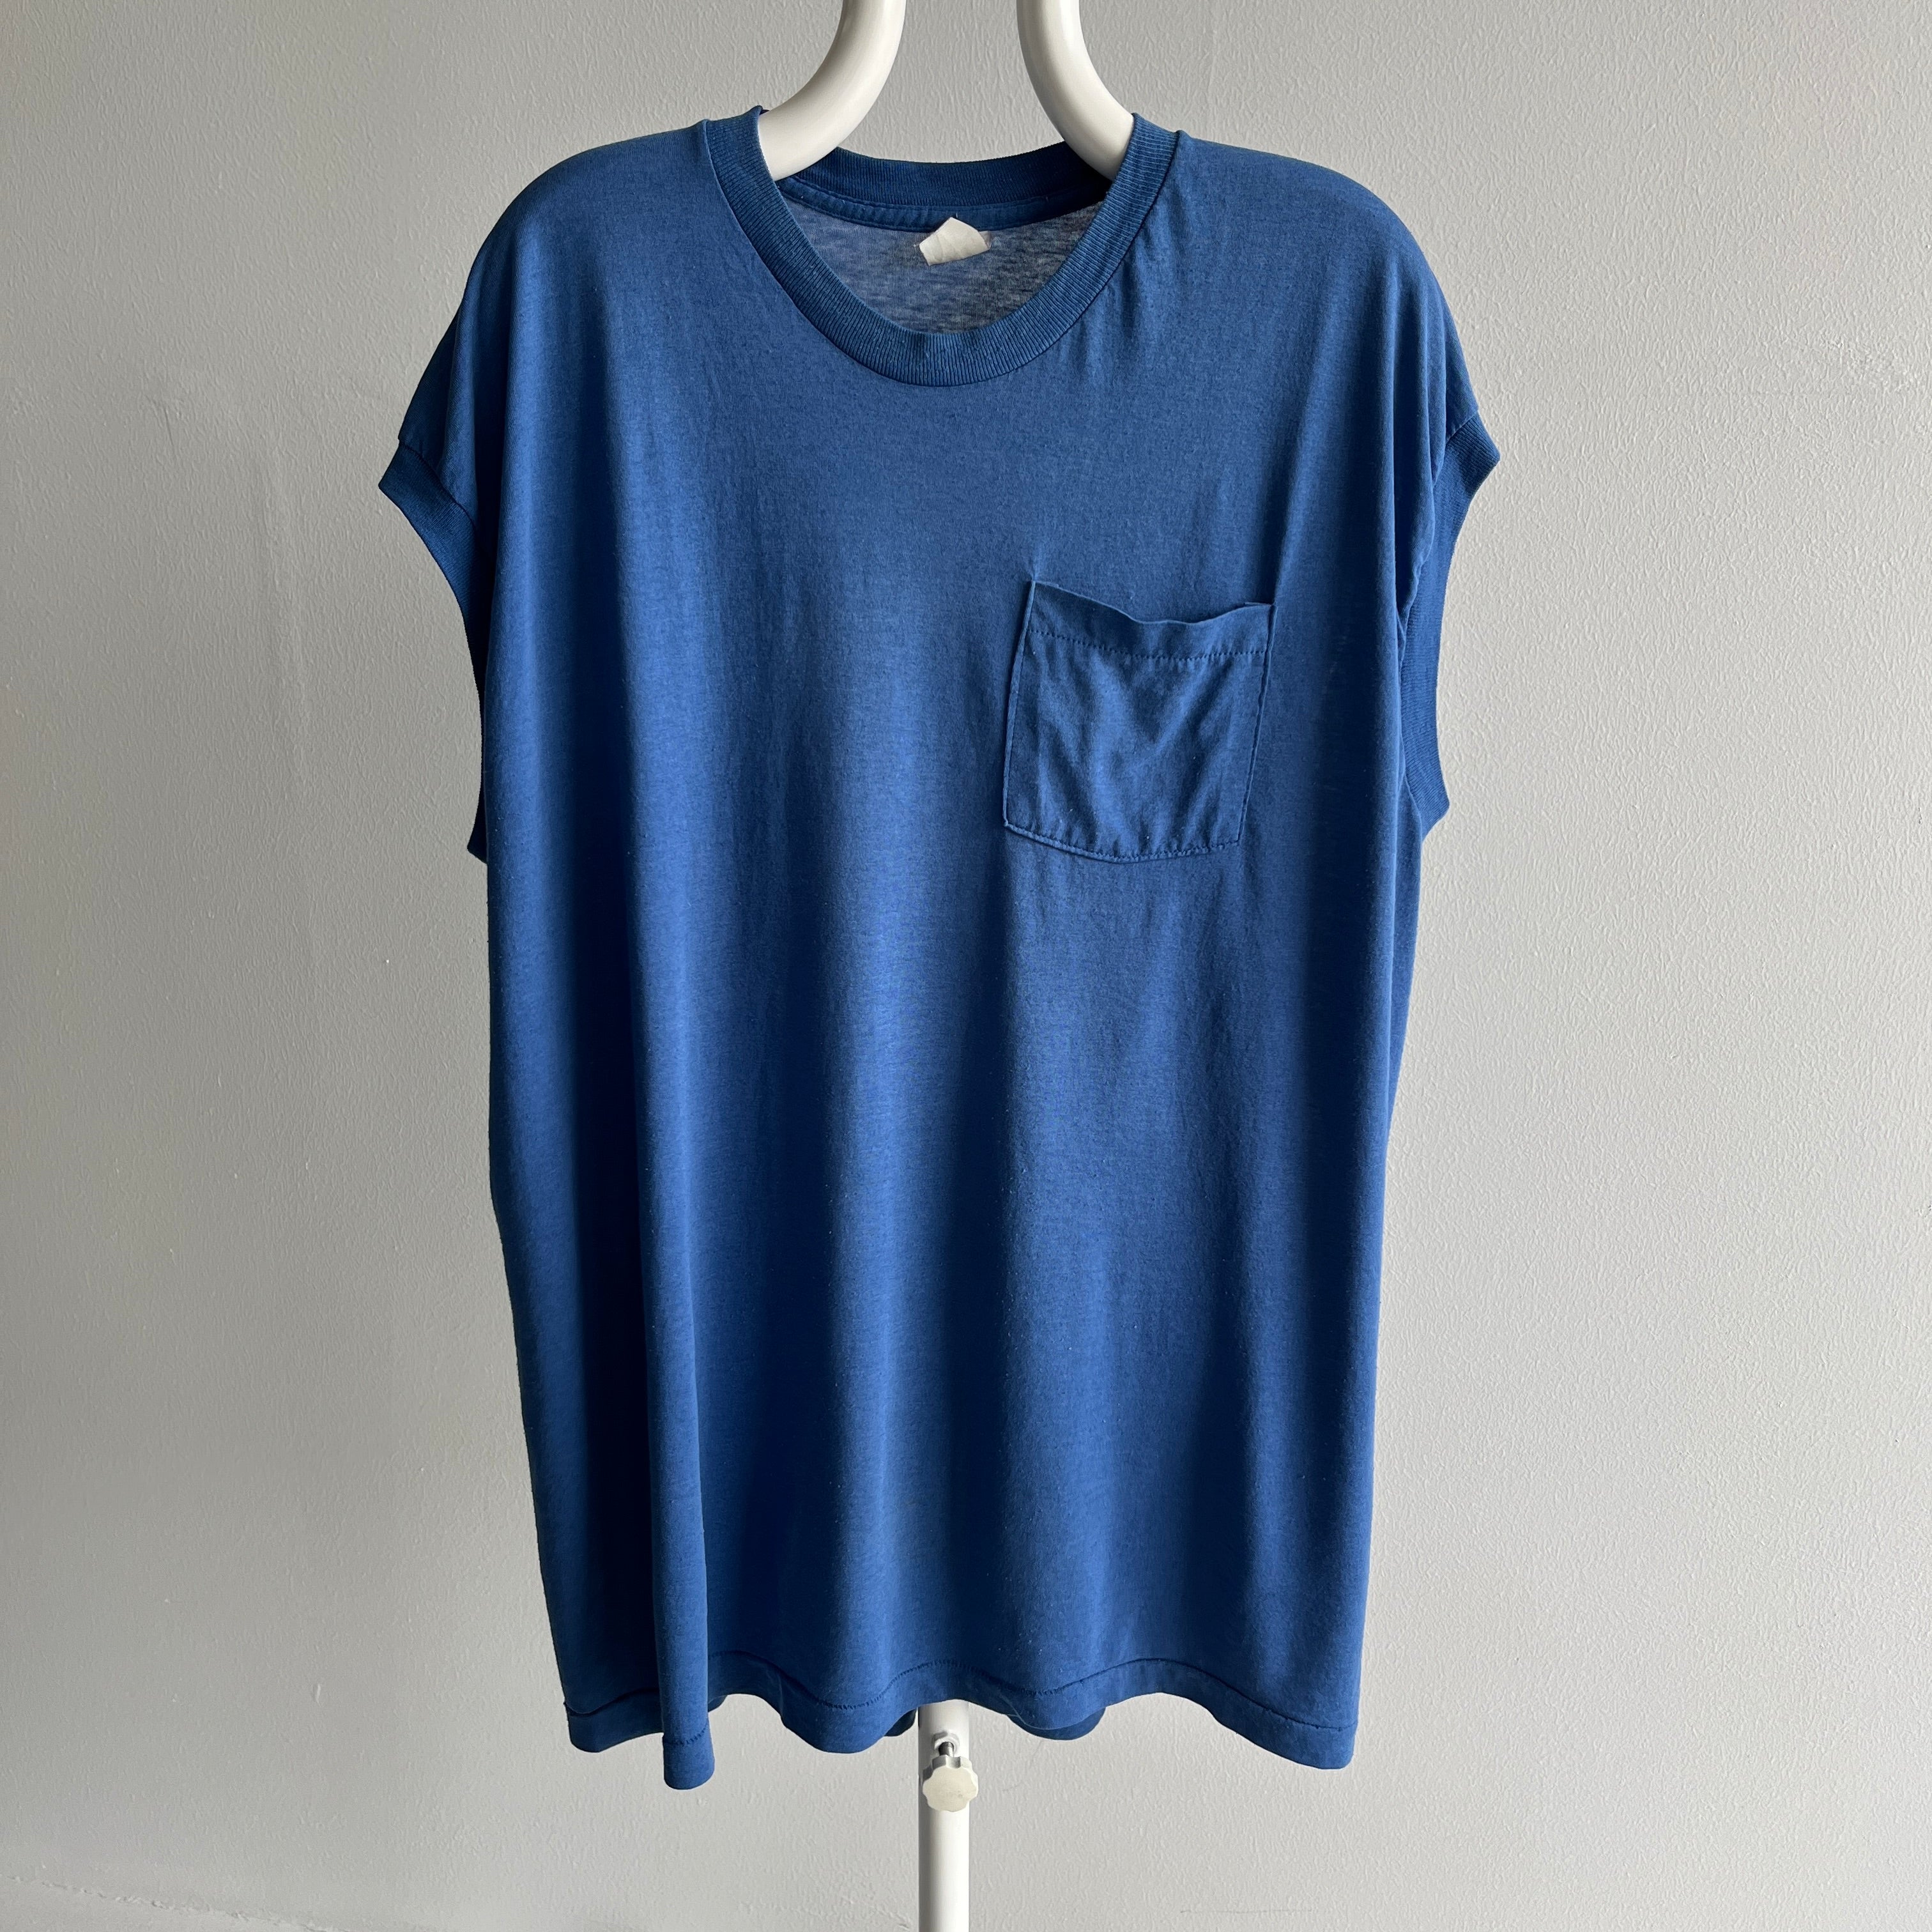 1980s Faded Royal Blue (Dusty Dodger